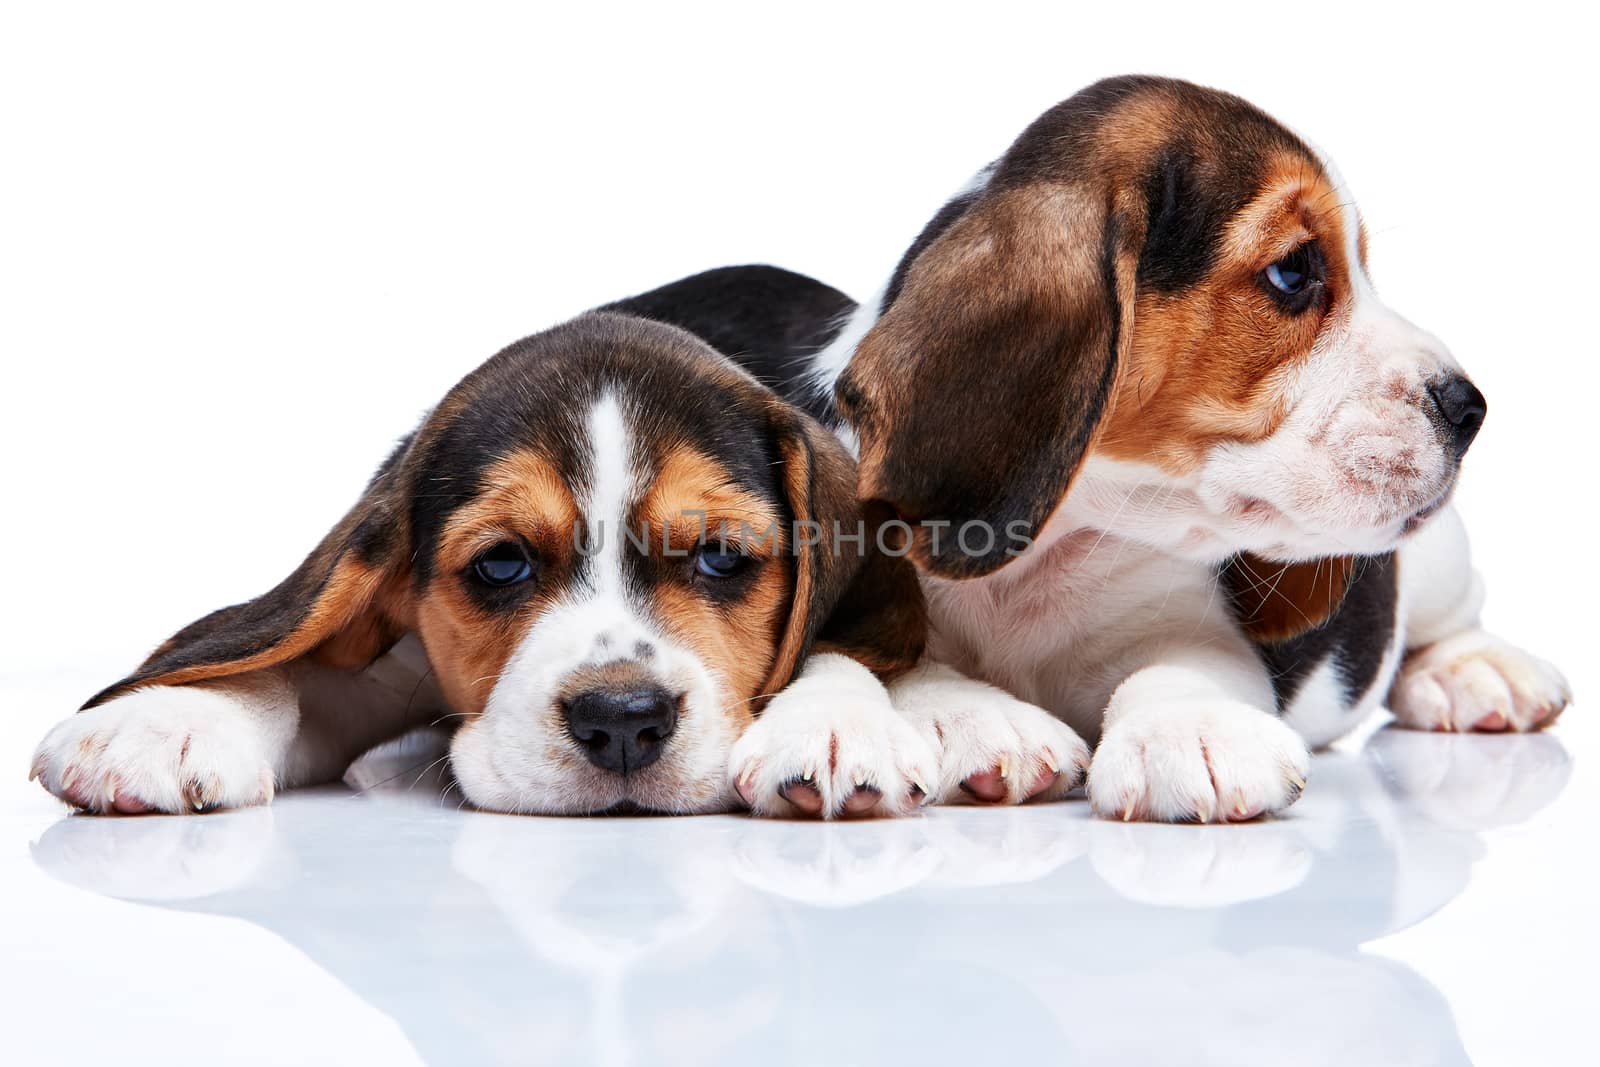 The two beagle puppies lying on the white background